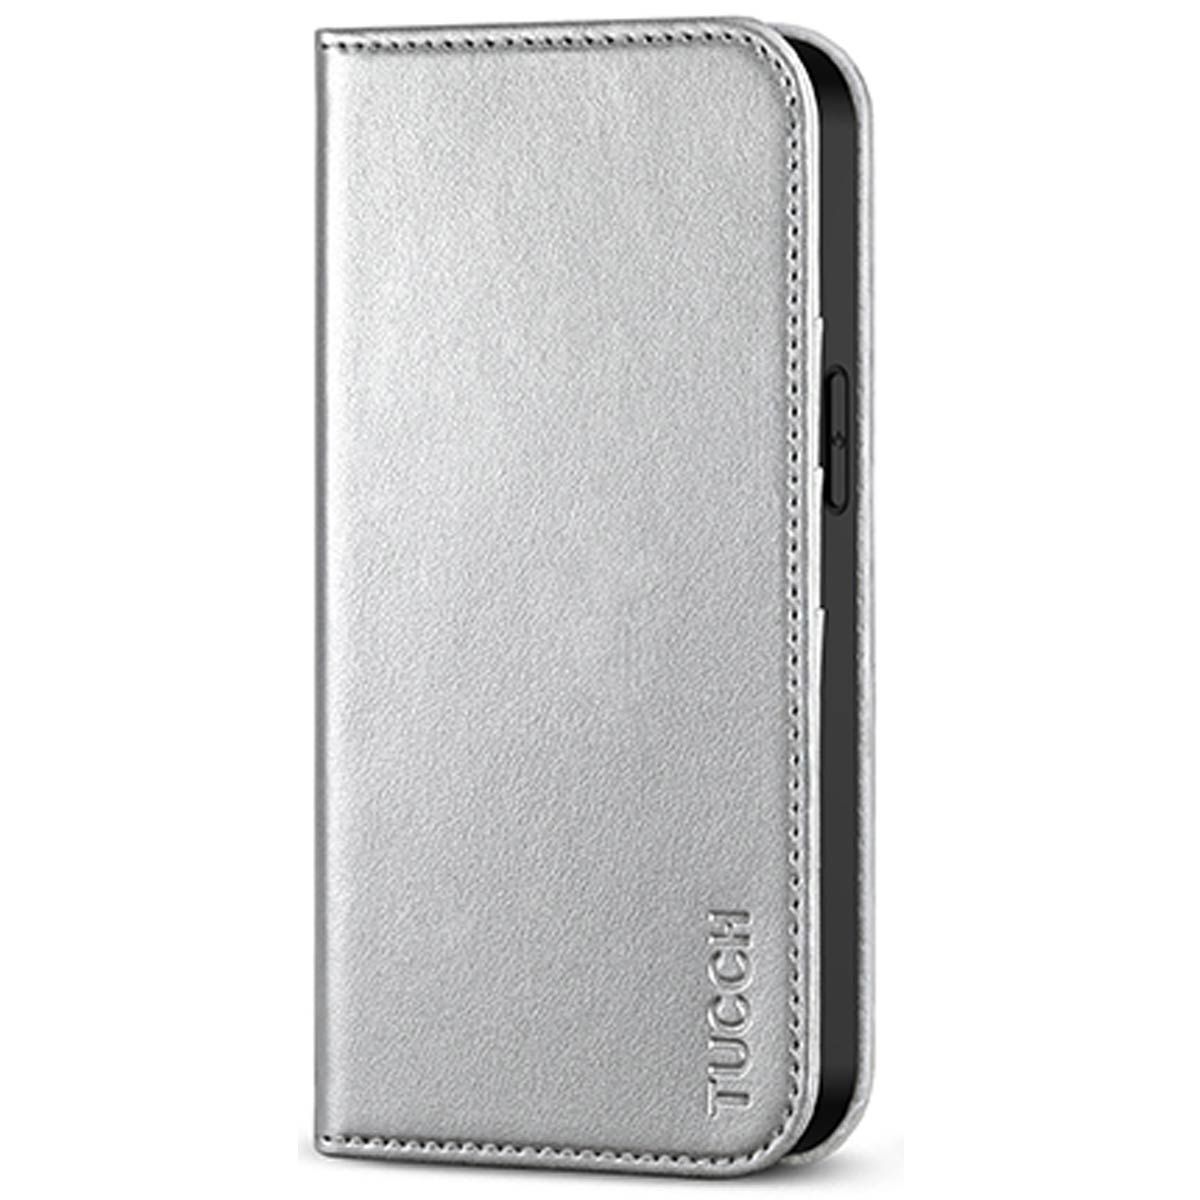 TUCCH iPhone 13 Pro Max Leather Case, iPhone 13 Pro Max PU Leather